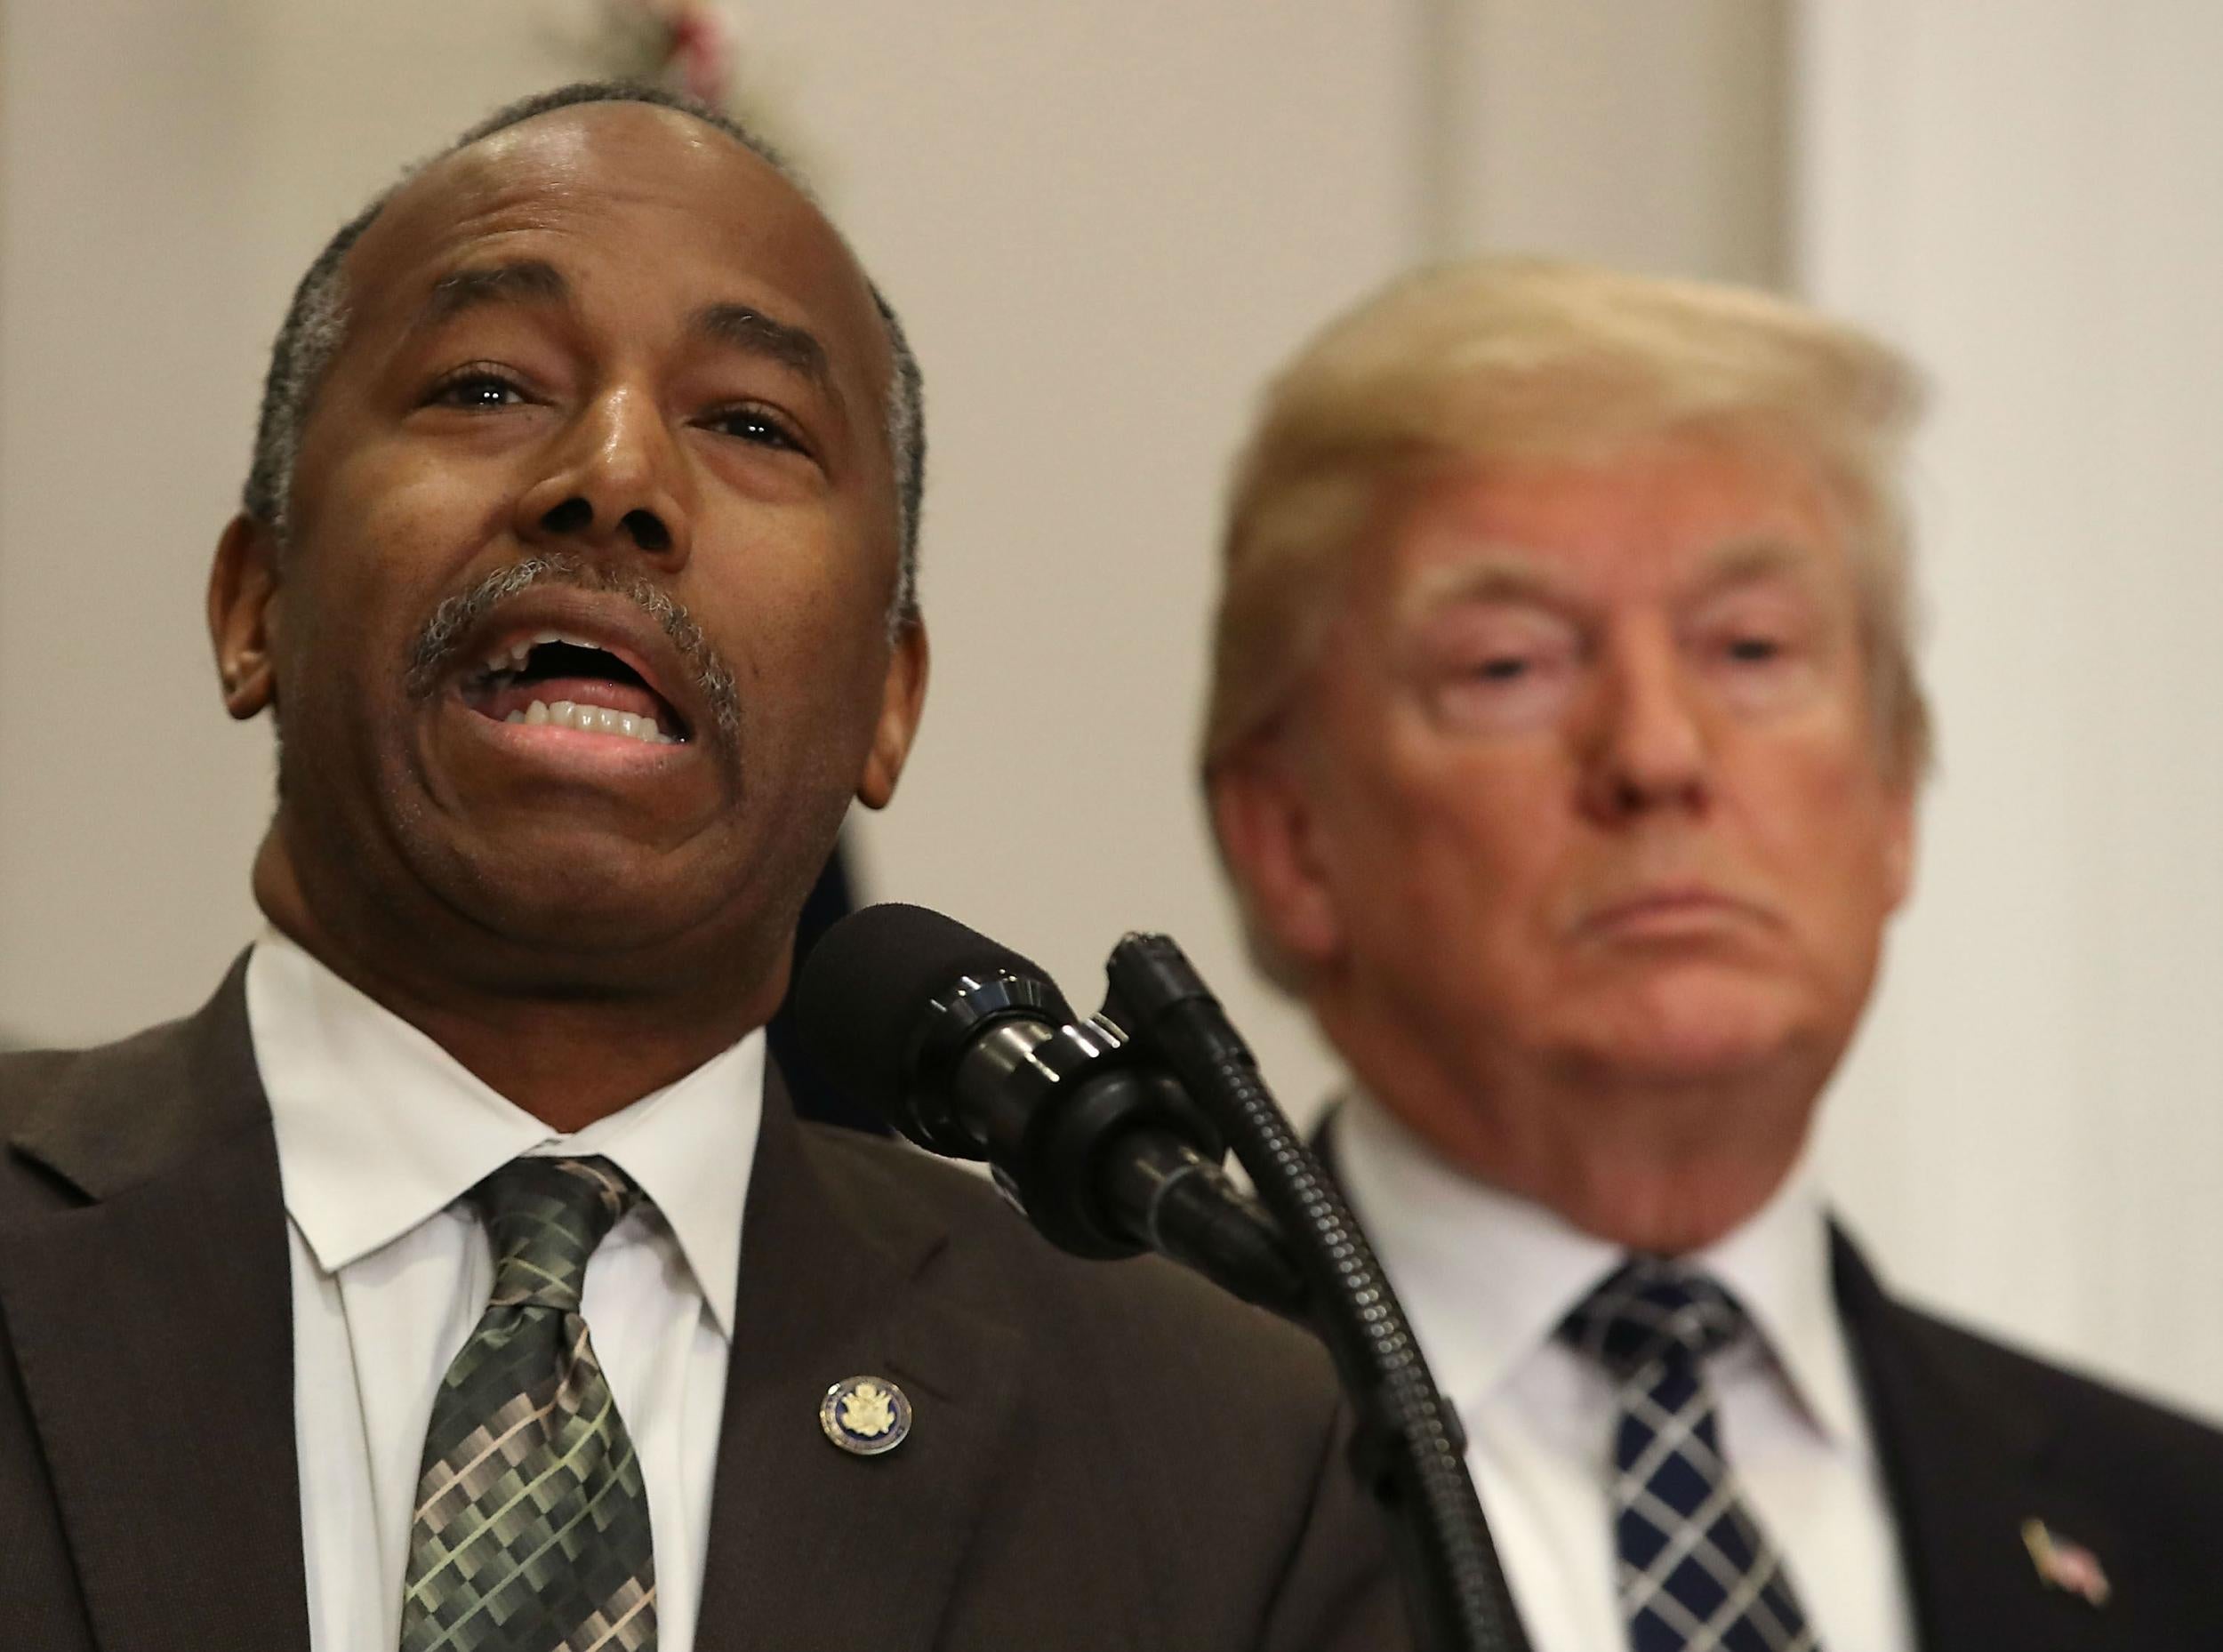 Former presidential candidate Ben Carson is President Donald Trump's Secretary of Housing and Urban Development